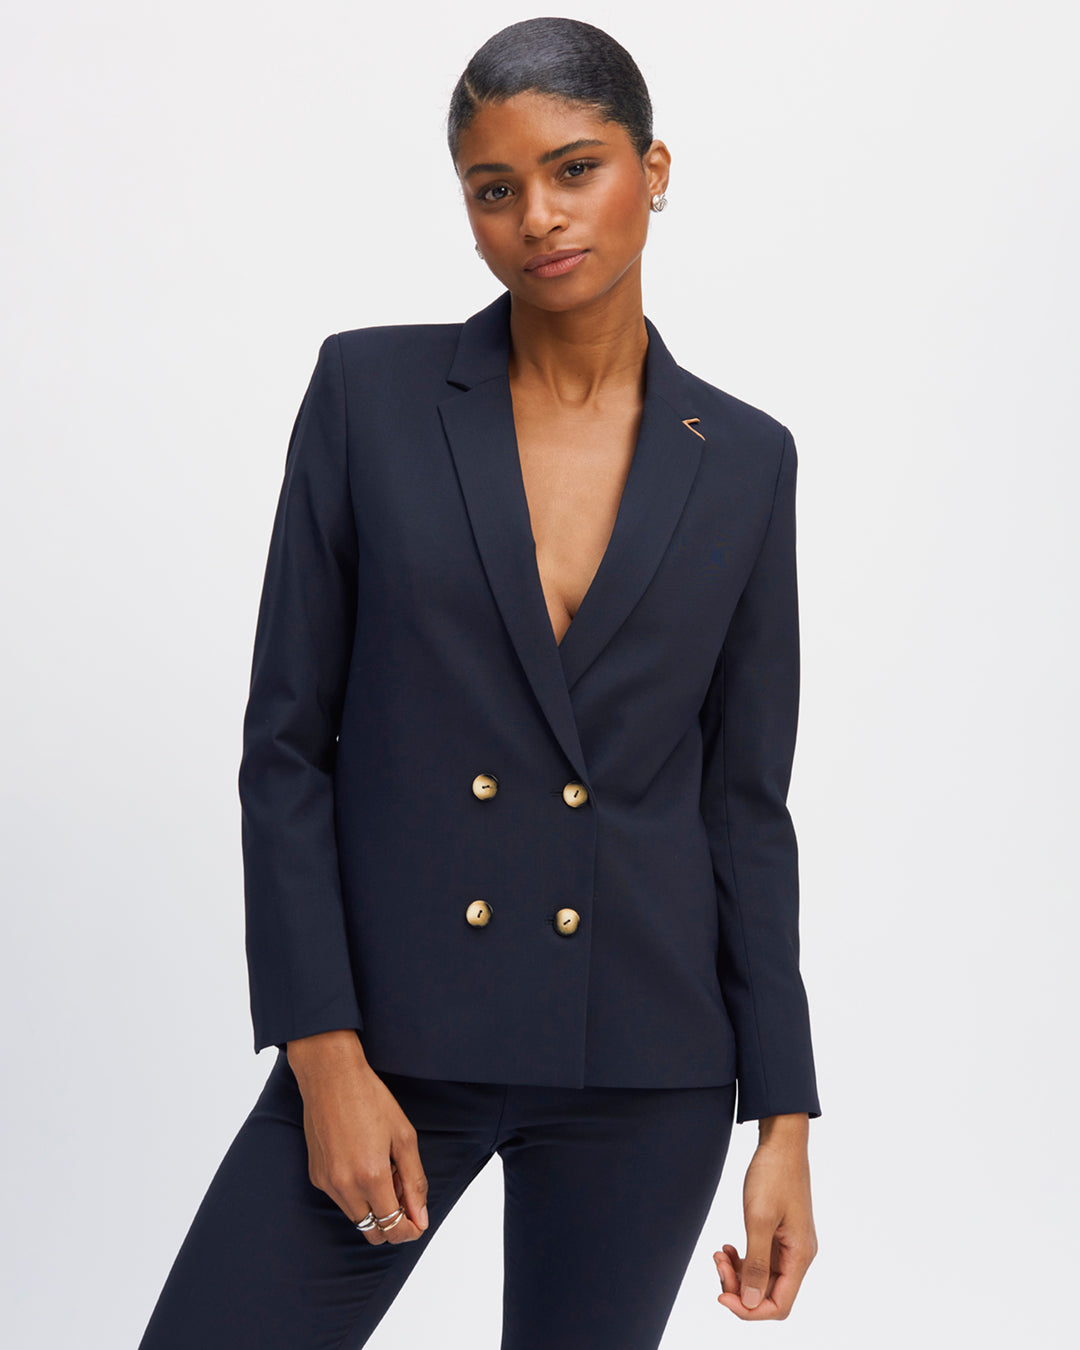 Tailored-crossover-jacket-blue-navy-four-buttons-length-mid-bottom-straight-cut-entirely-lined-Drap-of-laine-trees-soft-and-thermoregulator-Material-coming-from-a-great-italian-draper-17H10-tailored-jacket-for-women-paris-